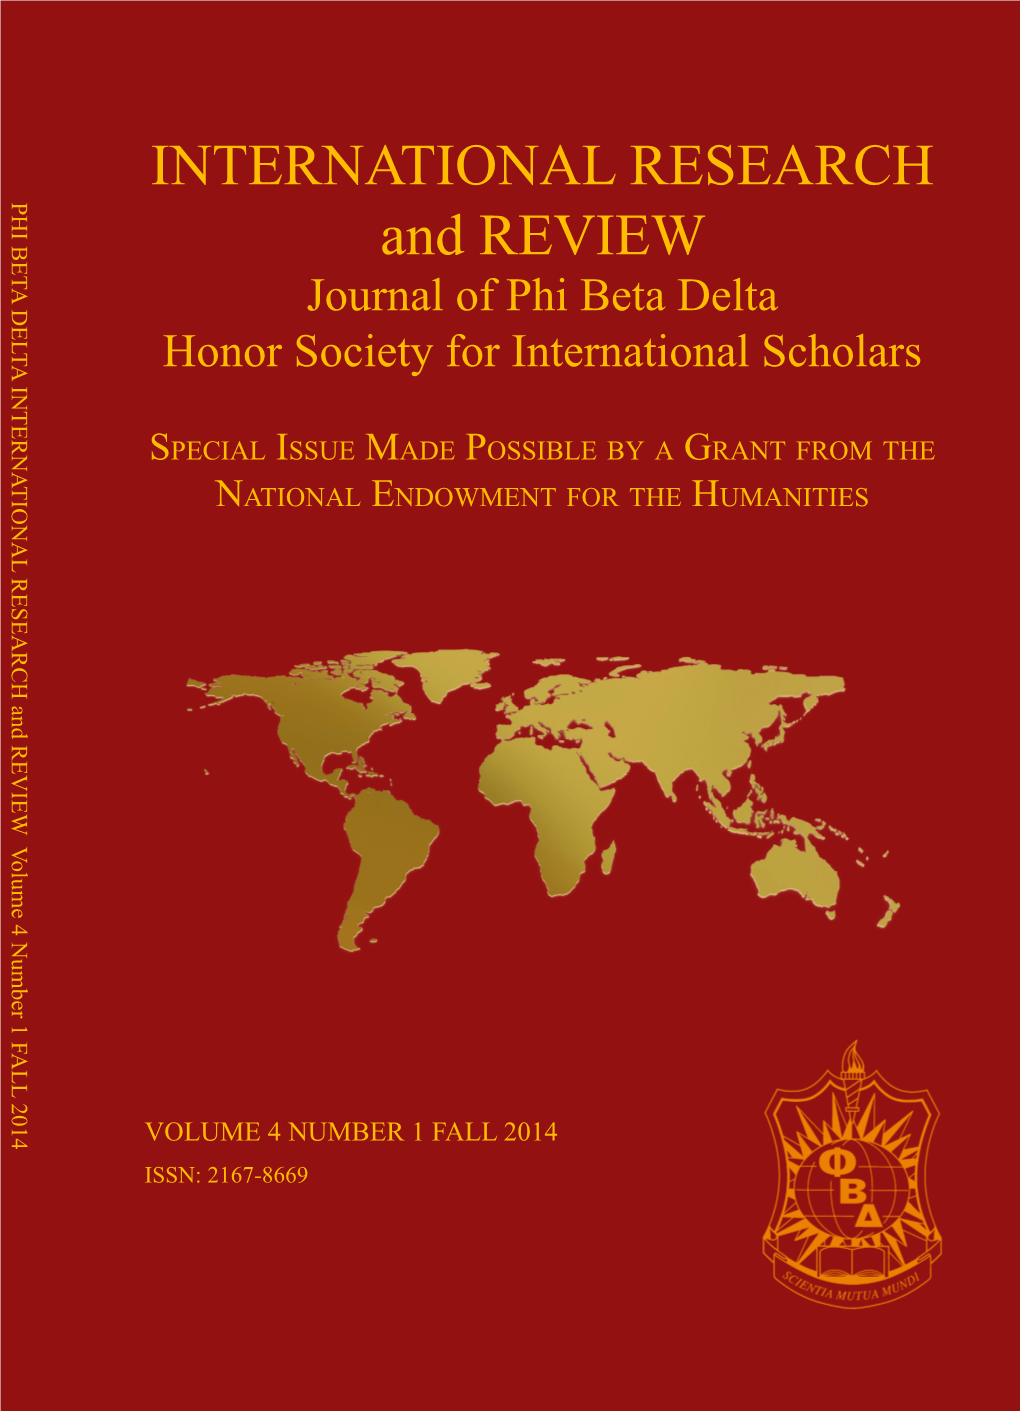 Fall 2014 IRR and Proceedings